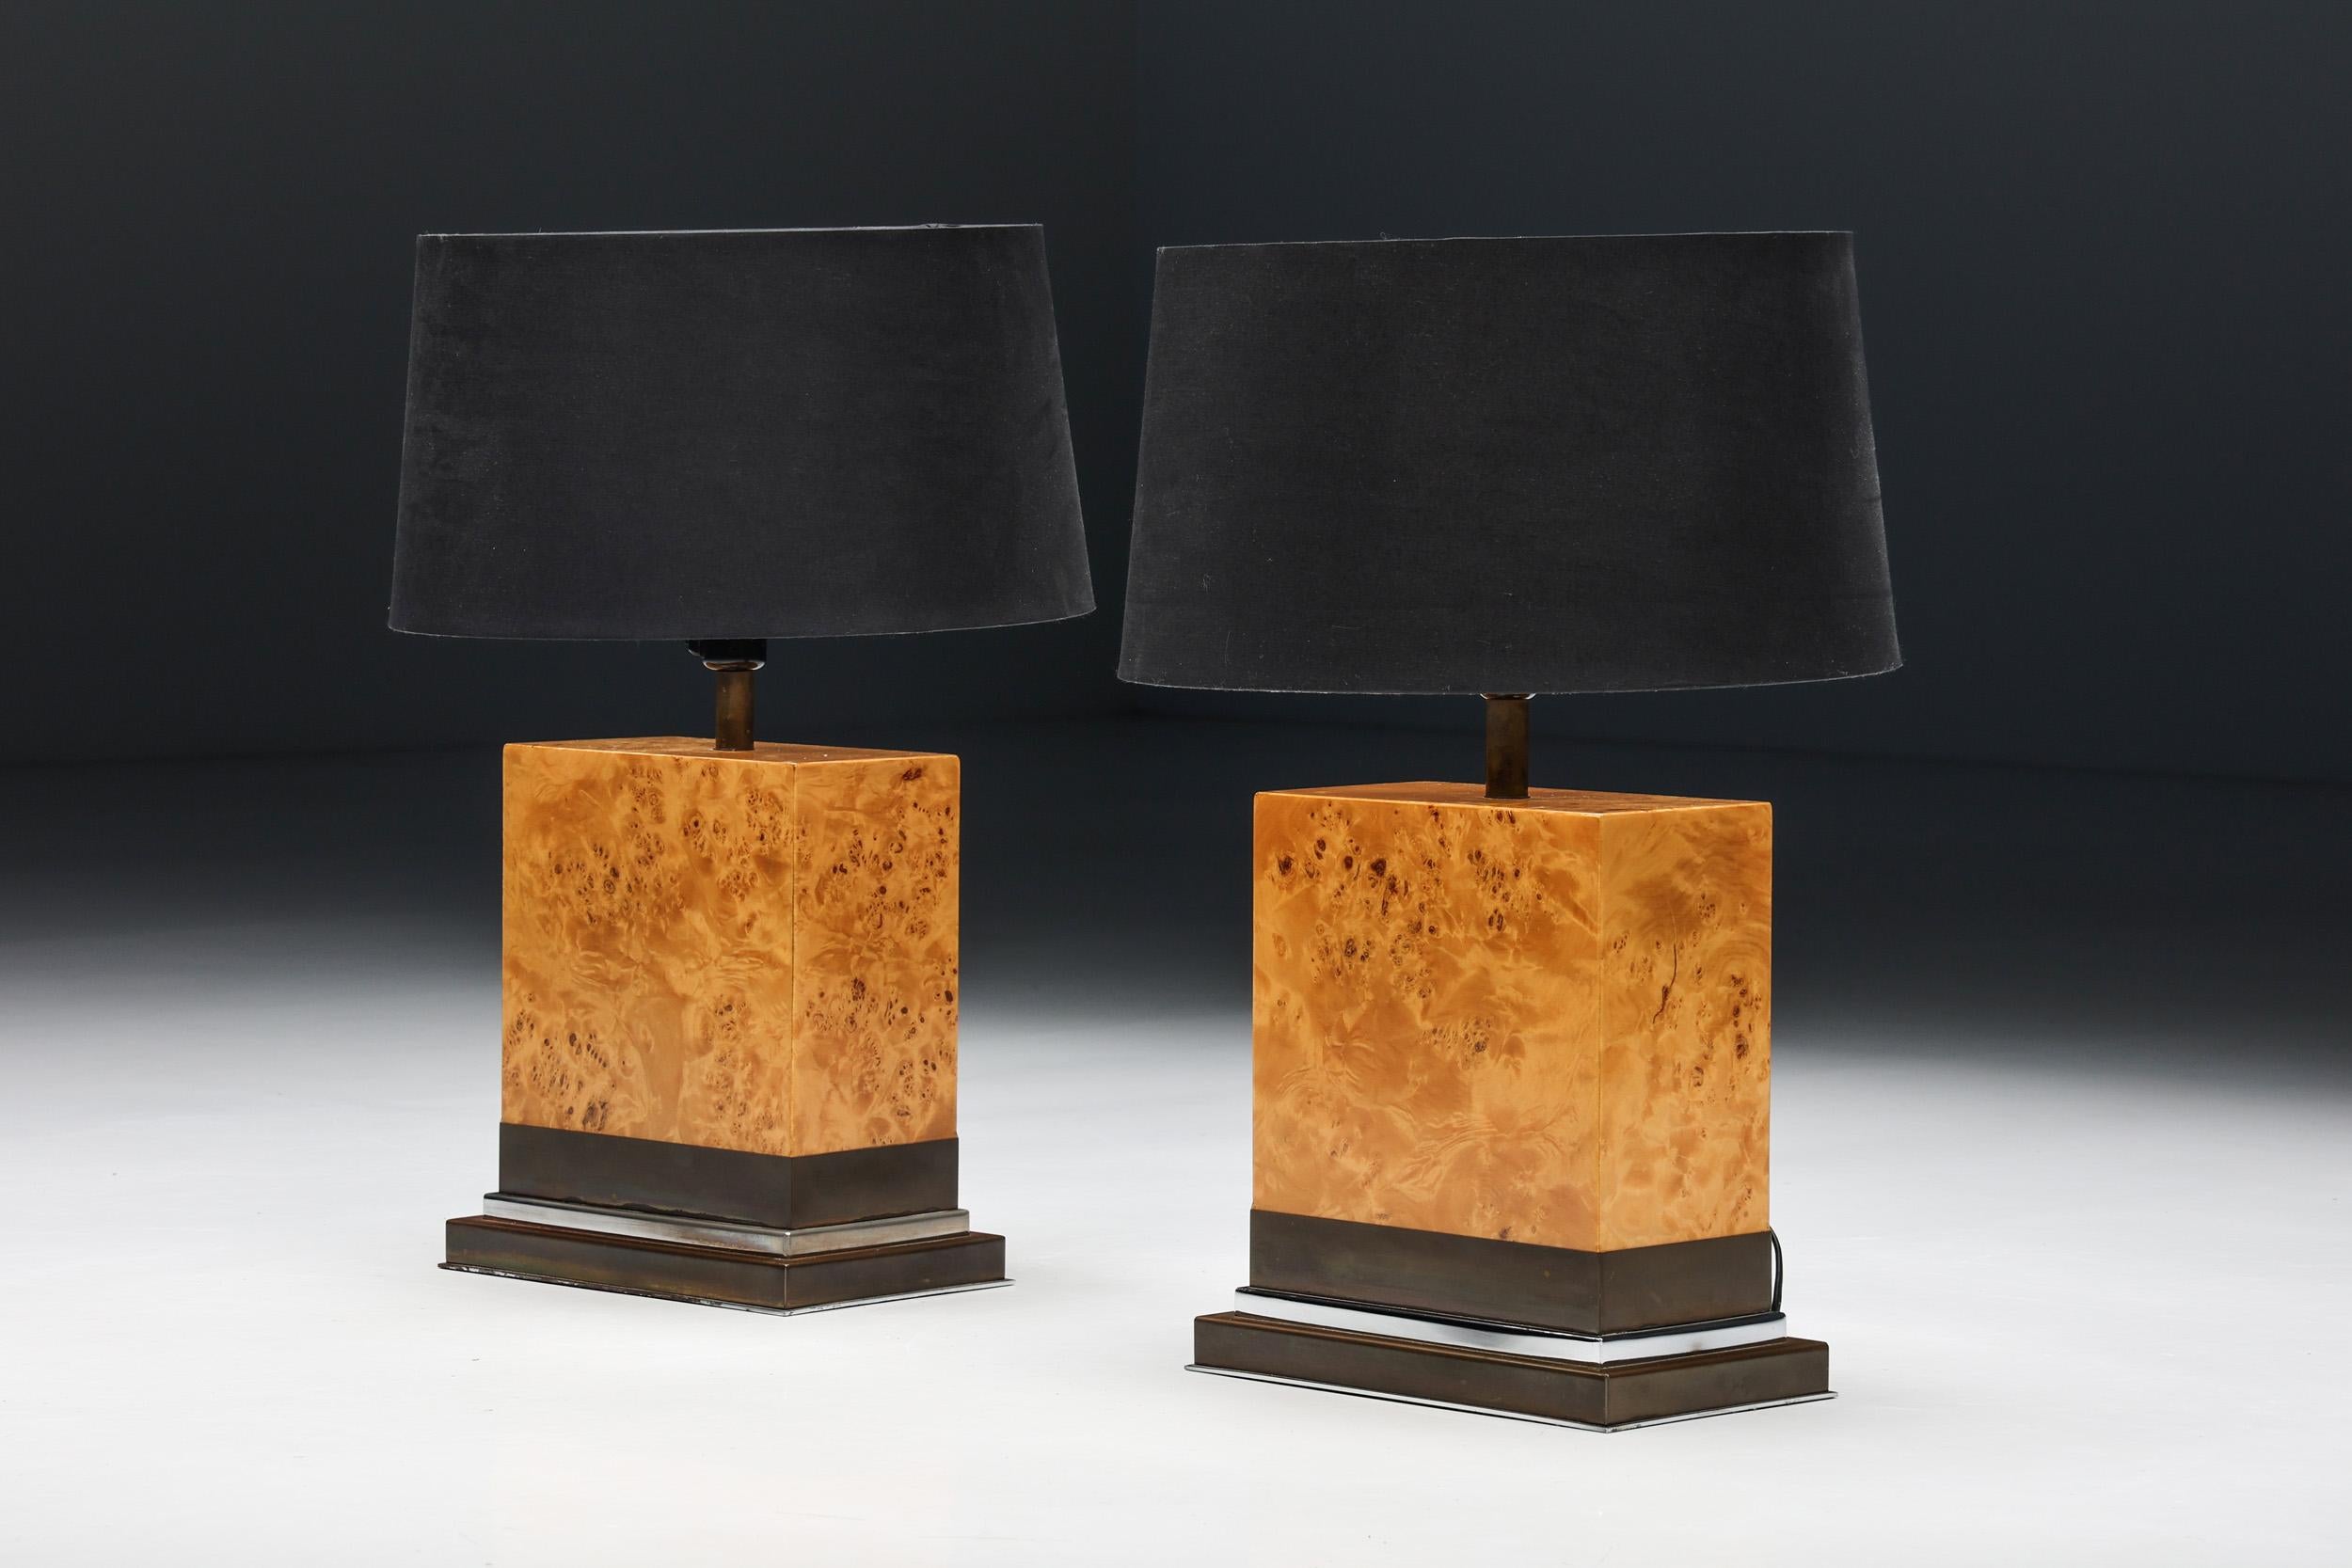 Jean Claude Mahey; Table Lamp; 1970s; Lightning; Burl Wood; Lacquered; Brass; Chrome; Hollywood Regency; Mid-Century Modern; France;

Jean Claude Mahey table lamp, produced in the 1970s, made of burl wood and chrome base. The chrome pedestal base